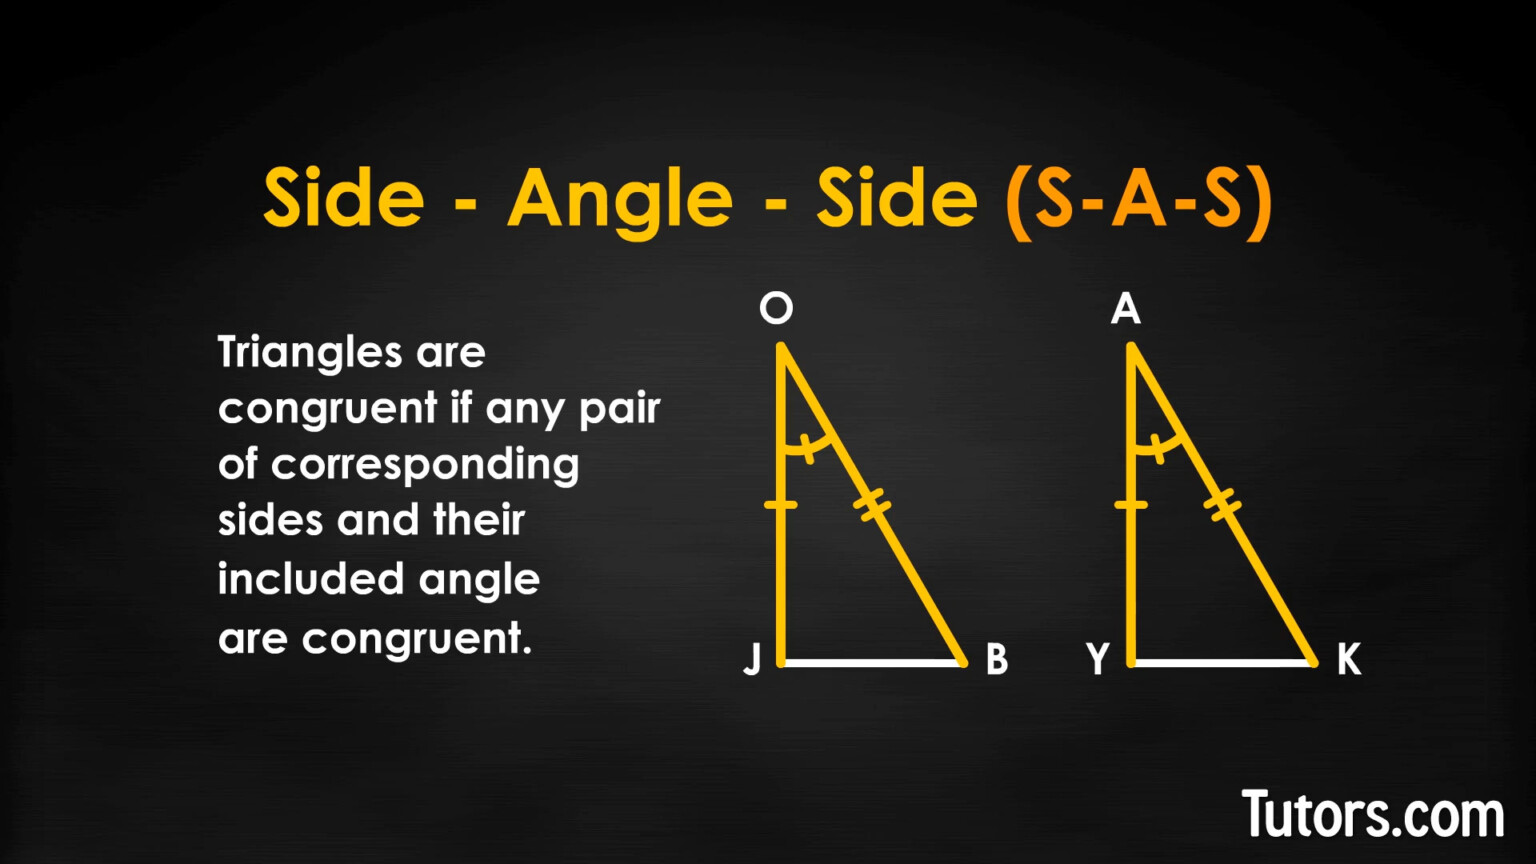 Sas And Sss Triangle Congruence Worksheet 2531